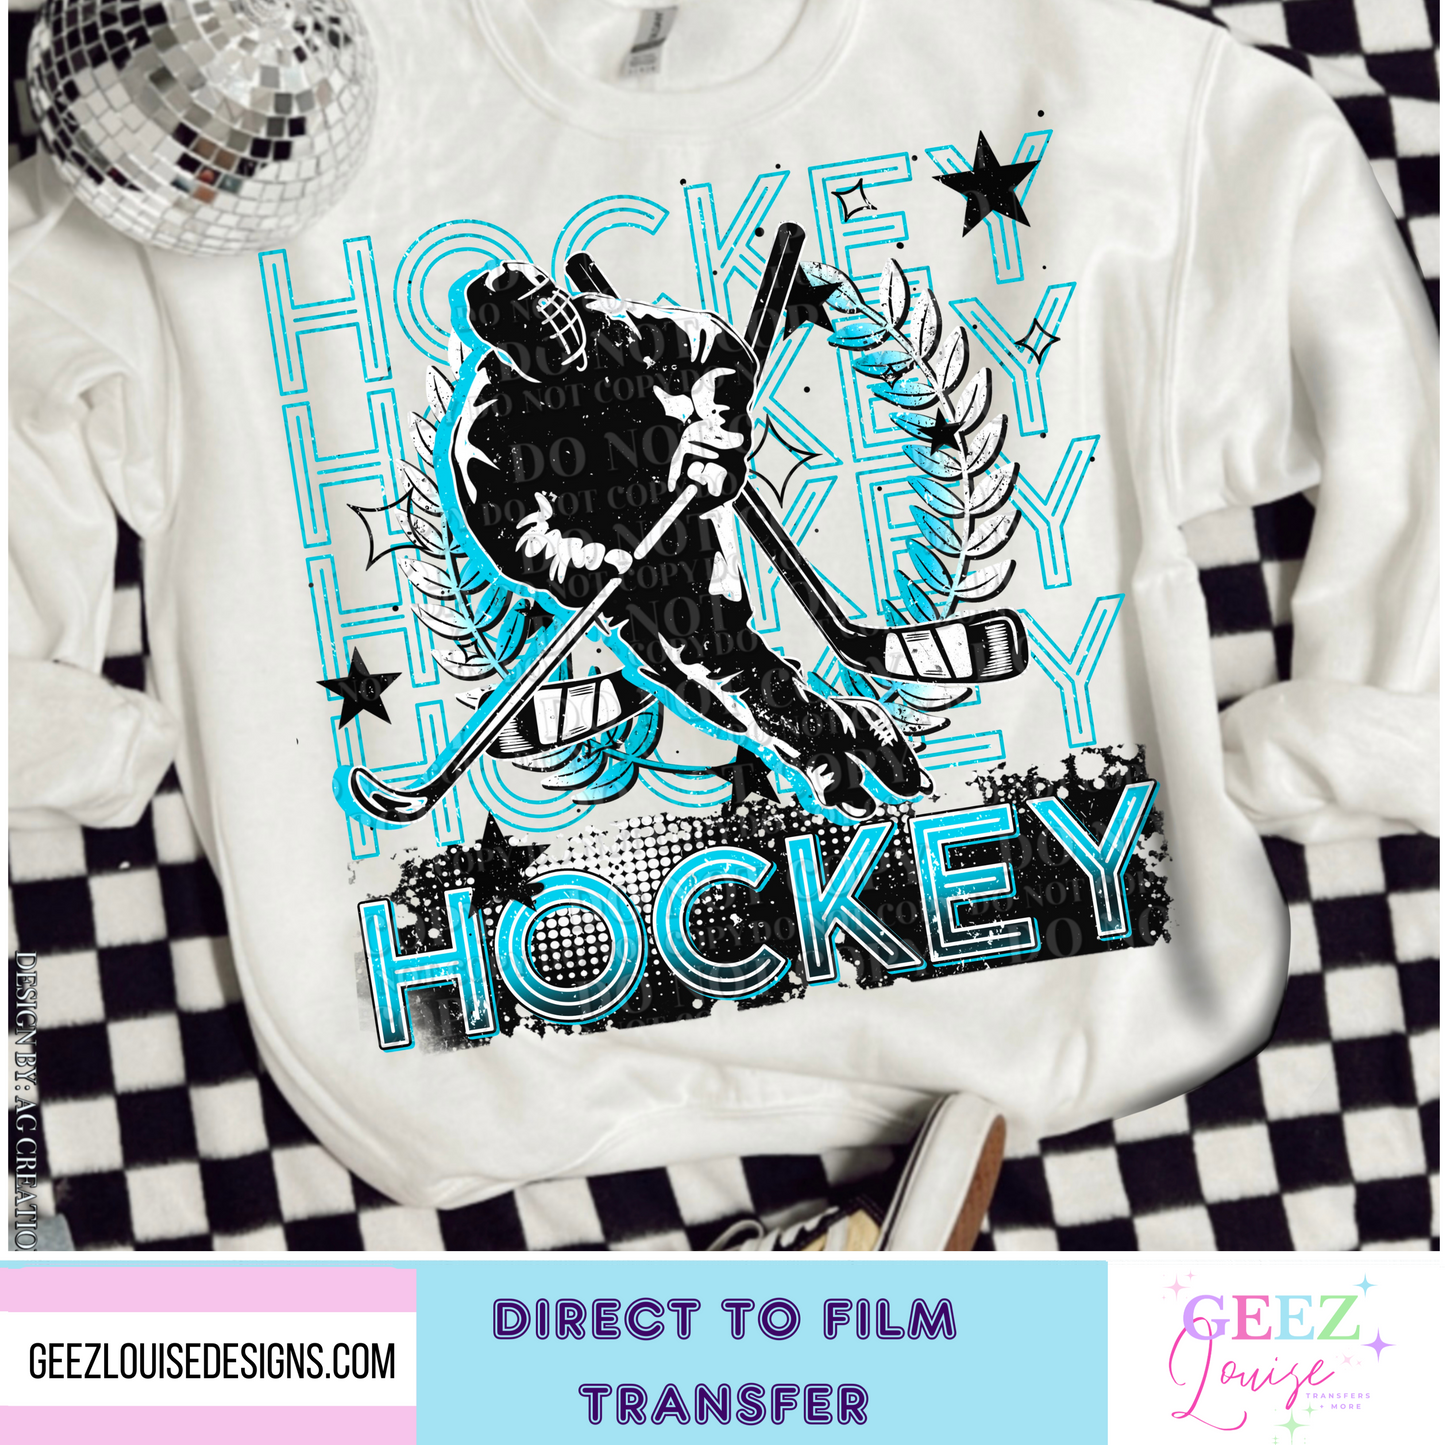 Hockey - Direct to Film Transfer - made to order